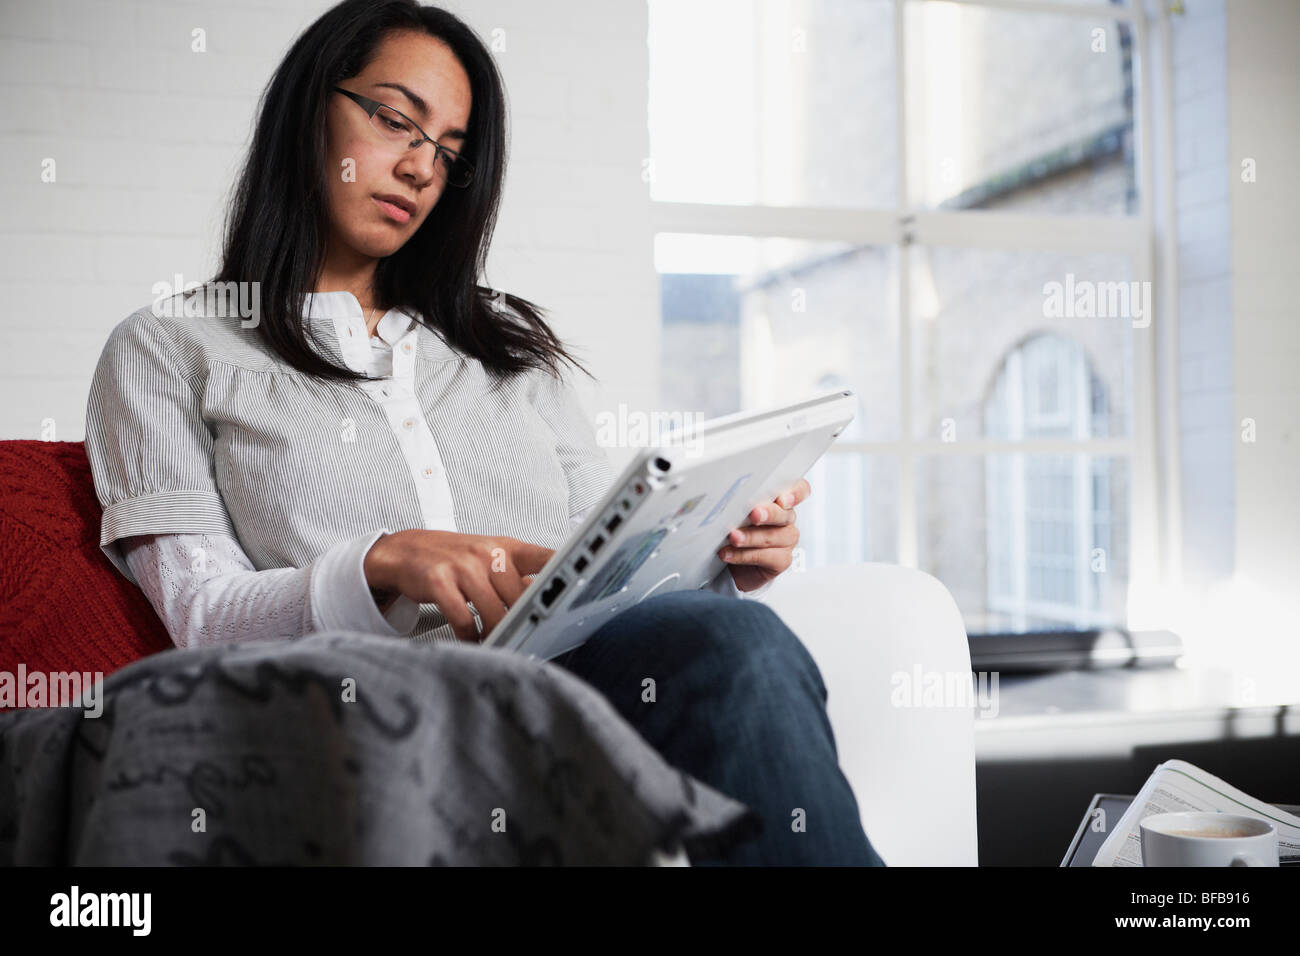 A woman uses a tablet PC in a birght homely enviroment, Stock Photo